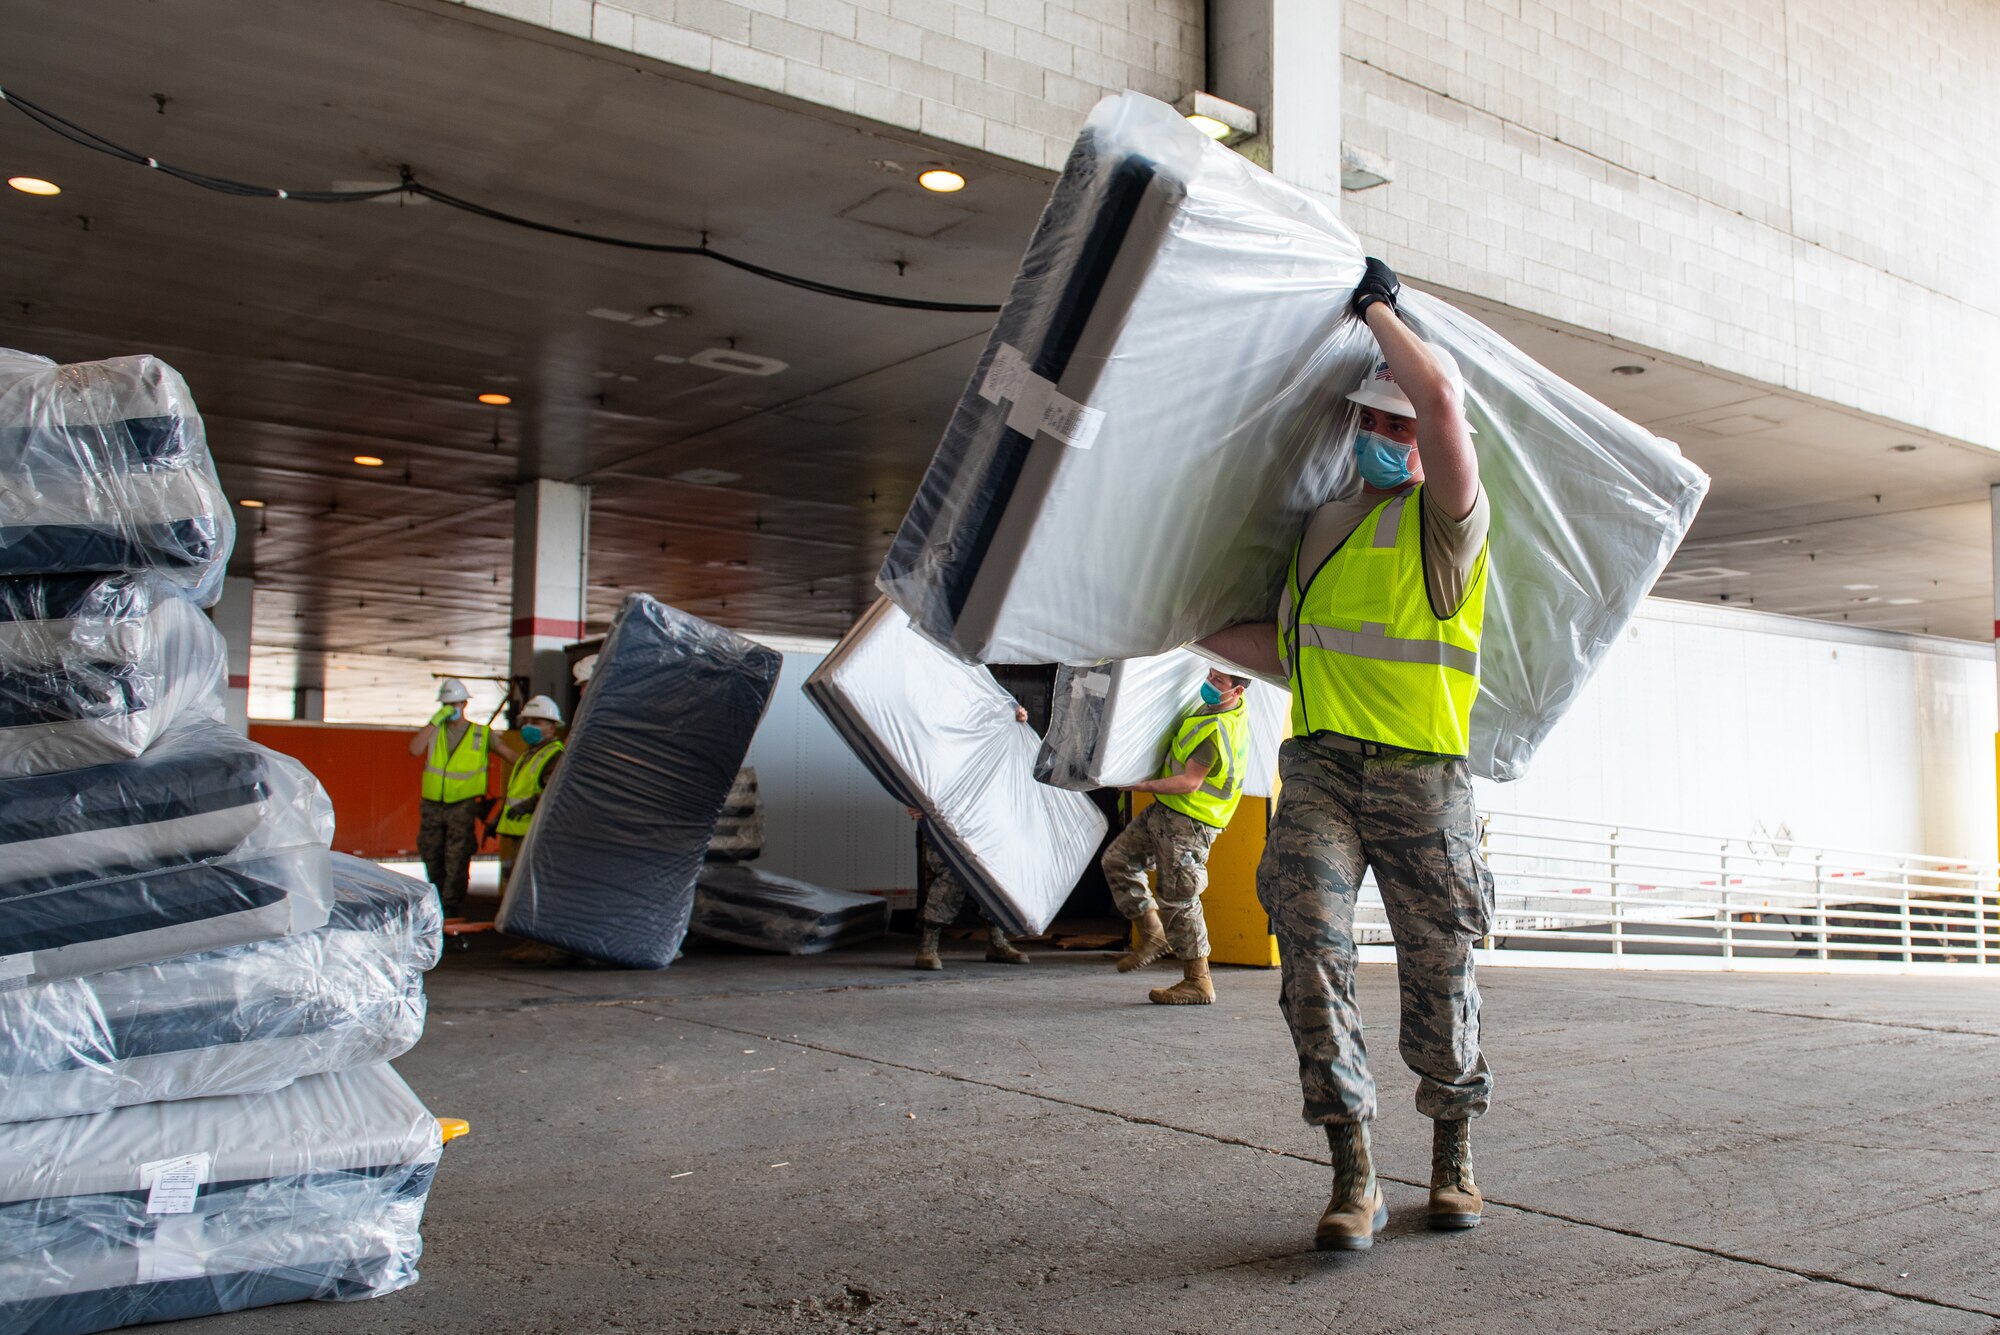 Members of the Illinois Air National Guard assemble medical equipment at the McCormick Place Convention Center in response to the COVID-19 pandemic in Chicago, Ill., April 8, 2020. Approximately 60 members of the Illinois Air National Guard were activated to support the US Army Corps of Engineers and the Federal Emergency Management Agency (FEMA) to temporarily convert part of the McCormick Place Convention Center into an Alternate Care Facility (ACF) for COVID-19 patients with mild symptoms who do not require intensive care in the Chicago area. (U.S. Air Force Photo by Senior Airman Jay Grabiec)